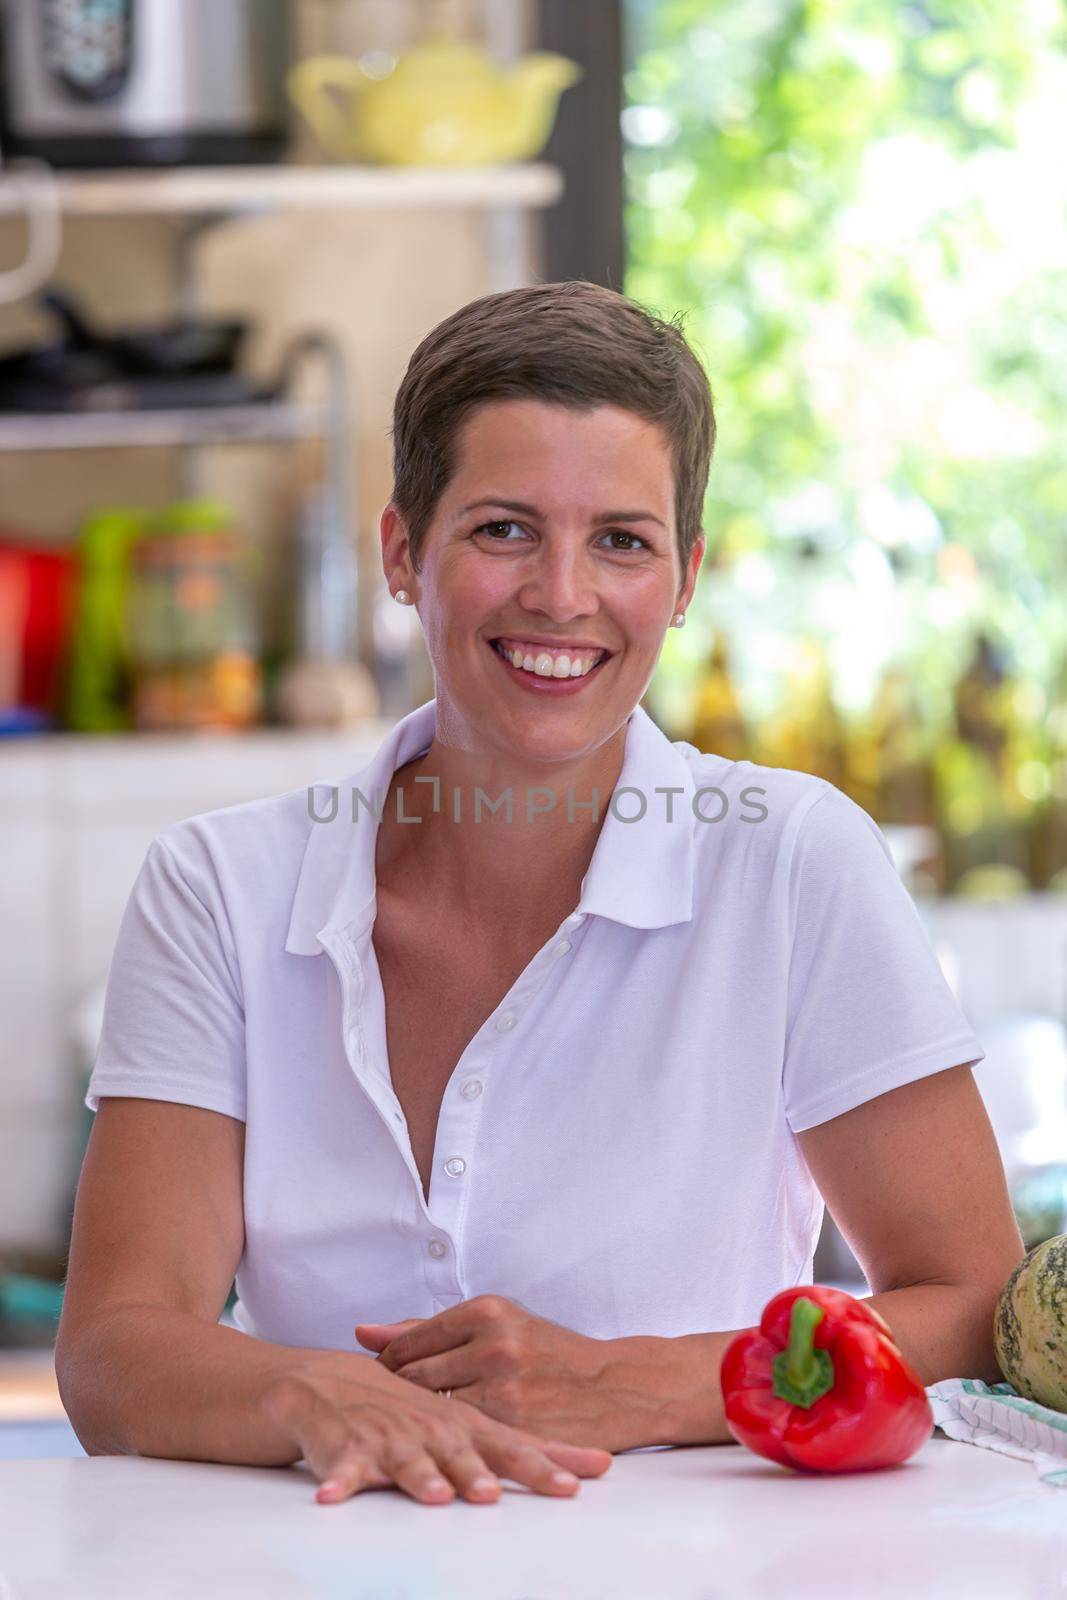 Young brown woman with short hair leaning on a table, kitchen utensils in the background.